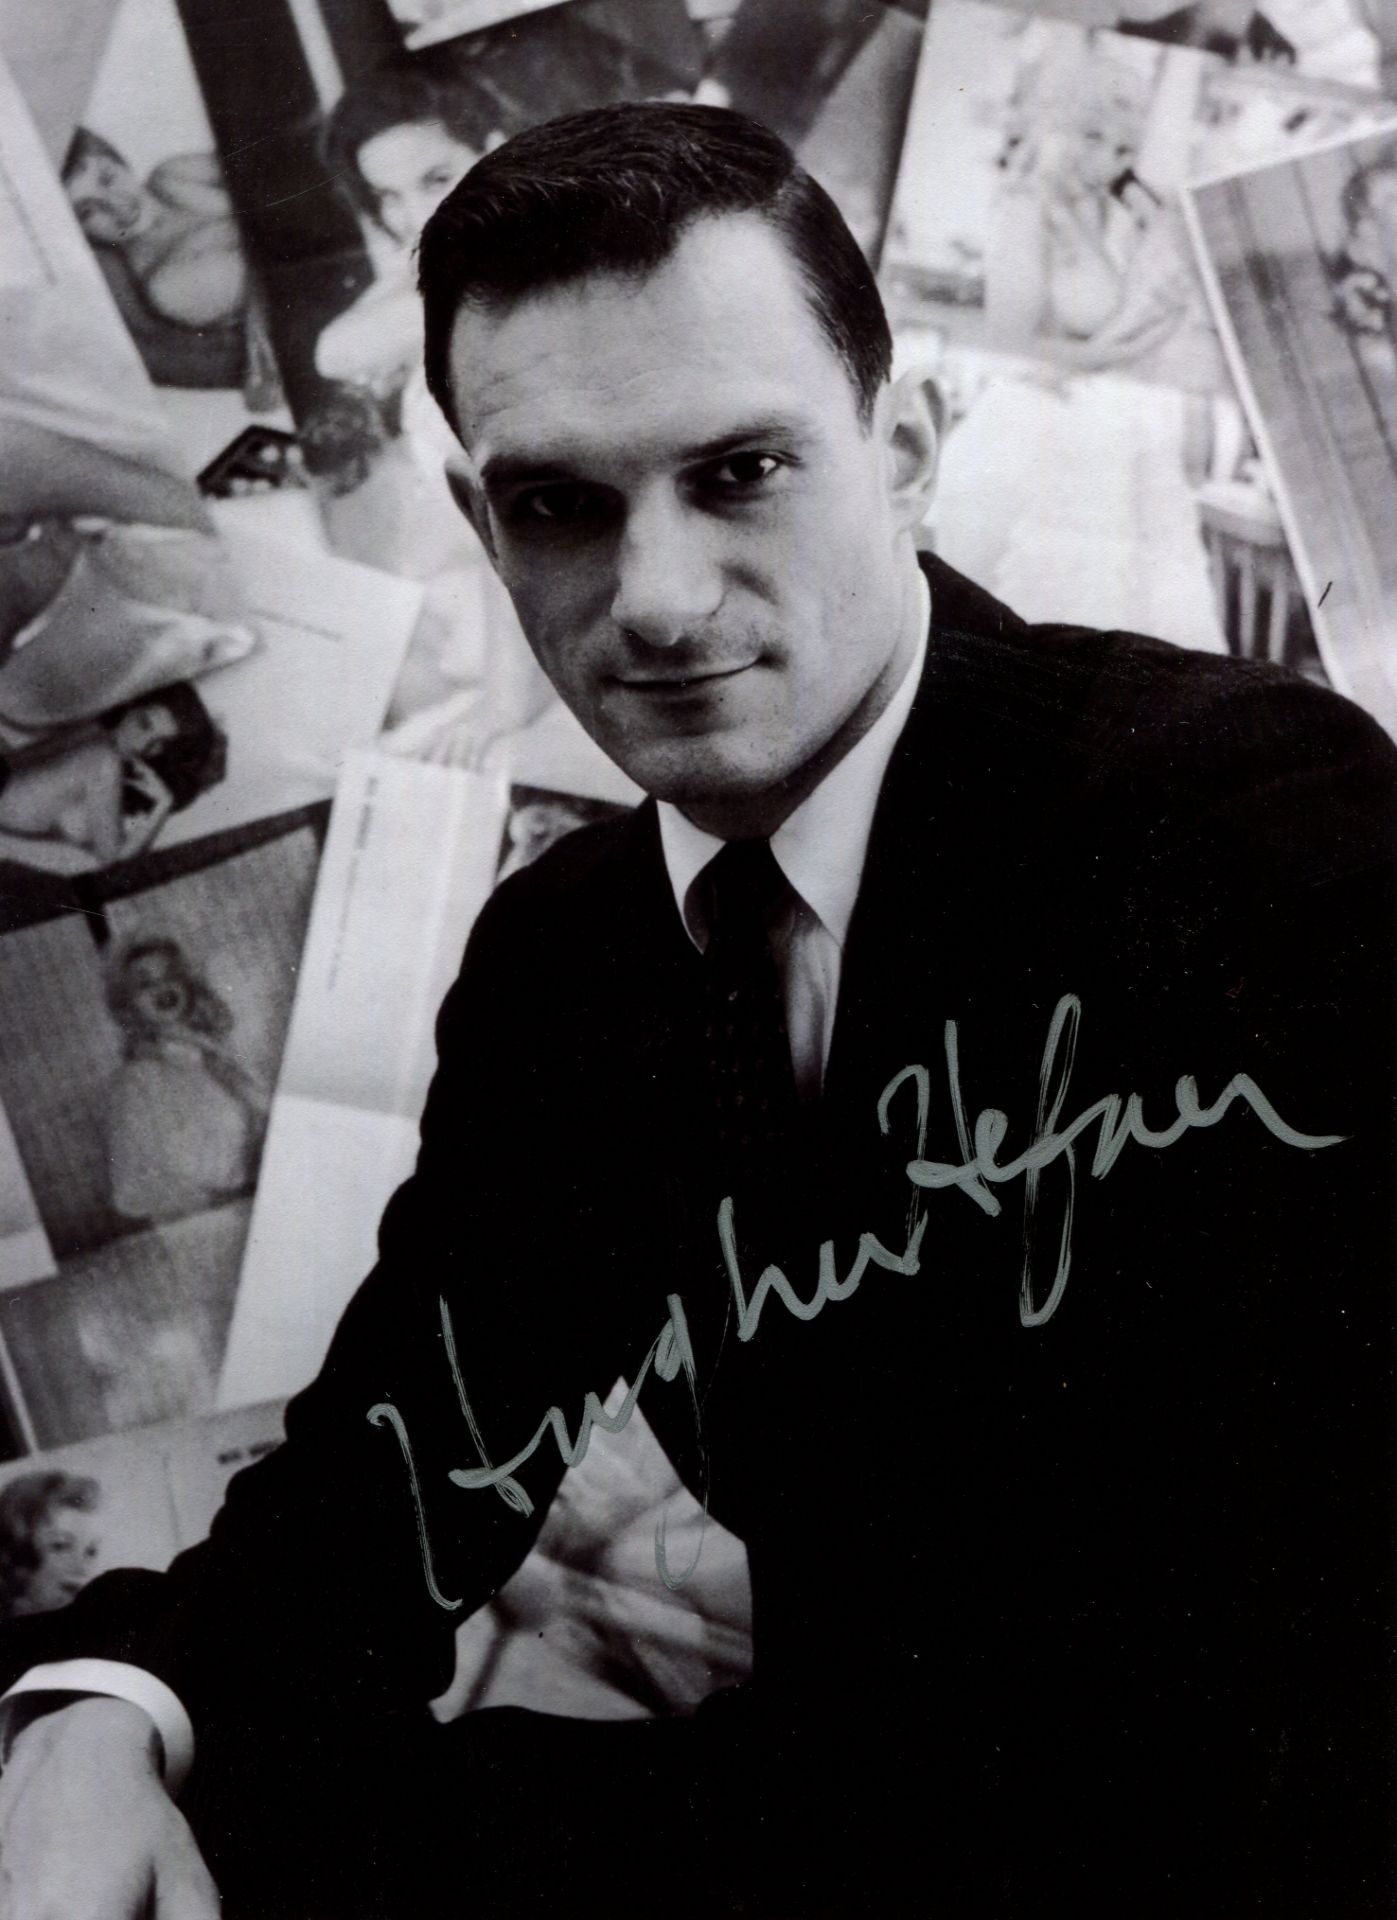 HEFNER HUGH: (1926-2017) American magazine publisher, the founder and editor-in-chief of Playboy